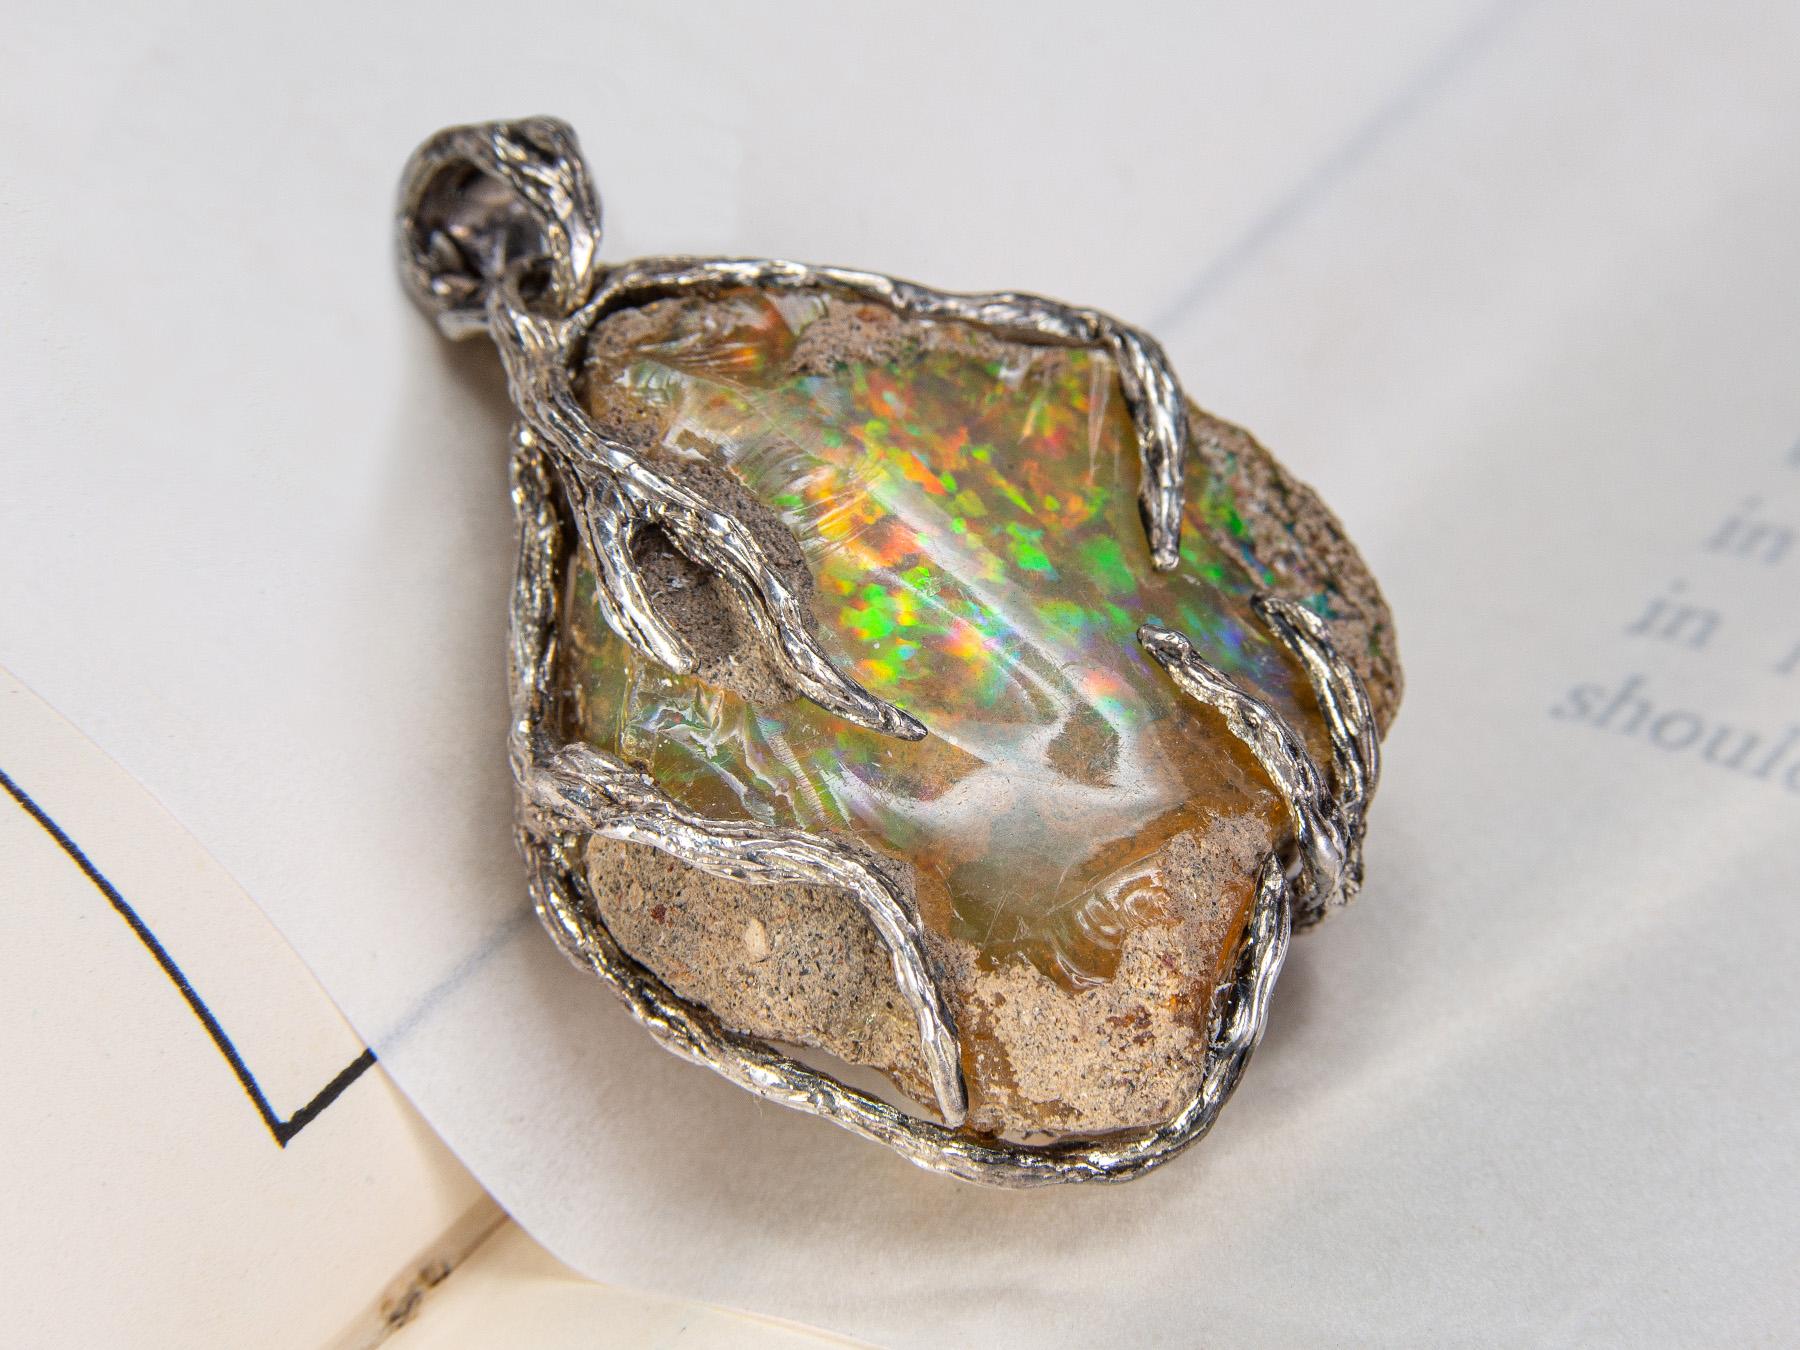 Sterling silver pendant with natural opal nugget

opal origin - Ethiopia 

stone weight - 50 carats

pendant weight - 14.48 grams

pendant height - 1.65 in / 42 mm

stone measurements - 0.59 x 1.1 x 1.26 in / 15 х 28 х 32 mm

Roots collection